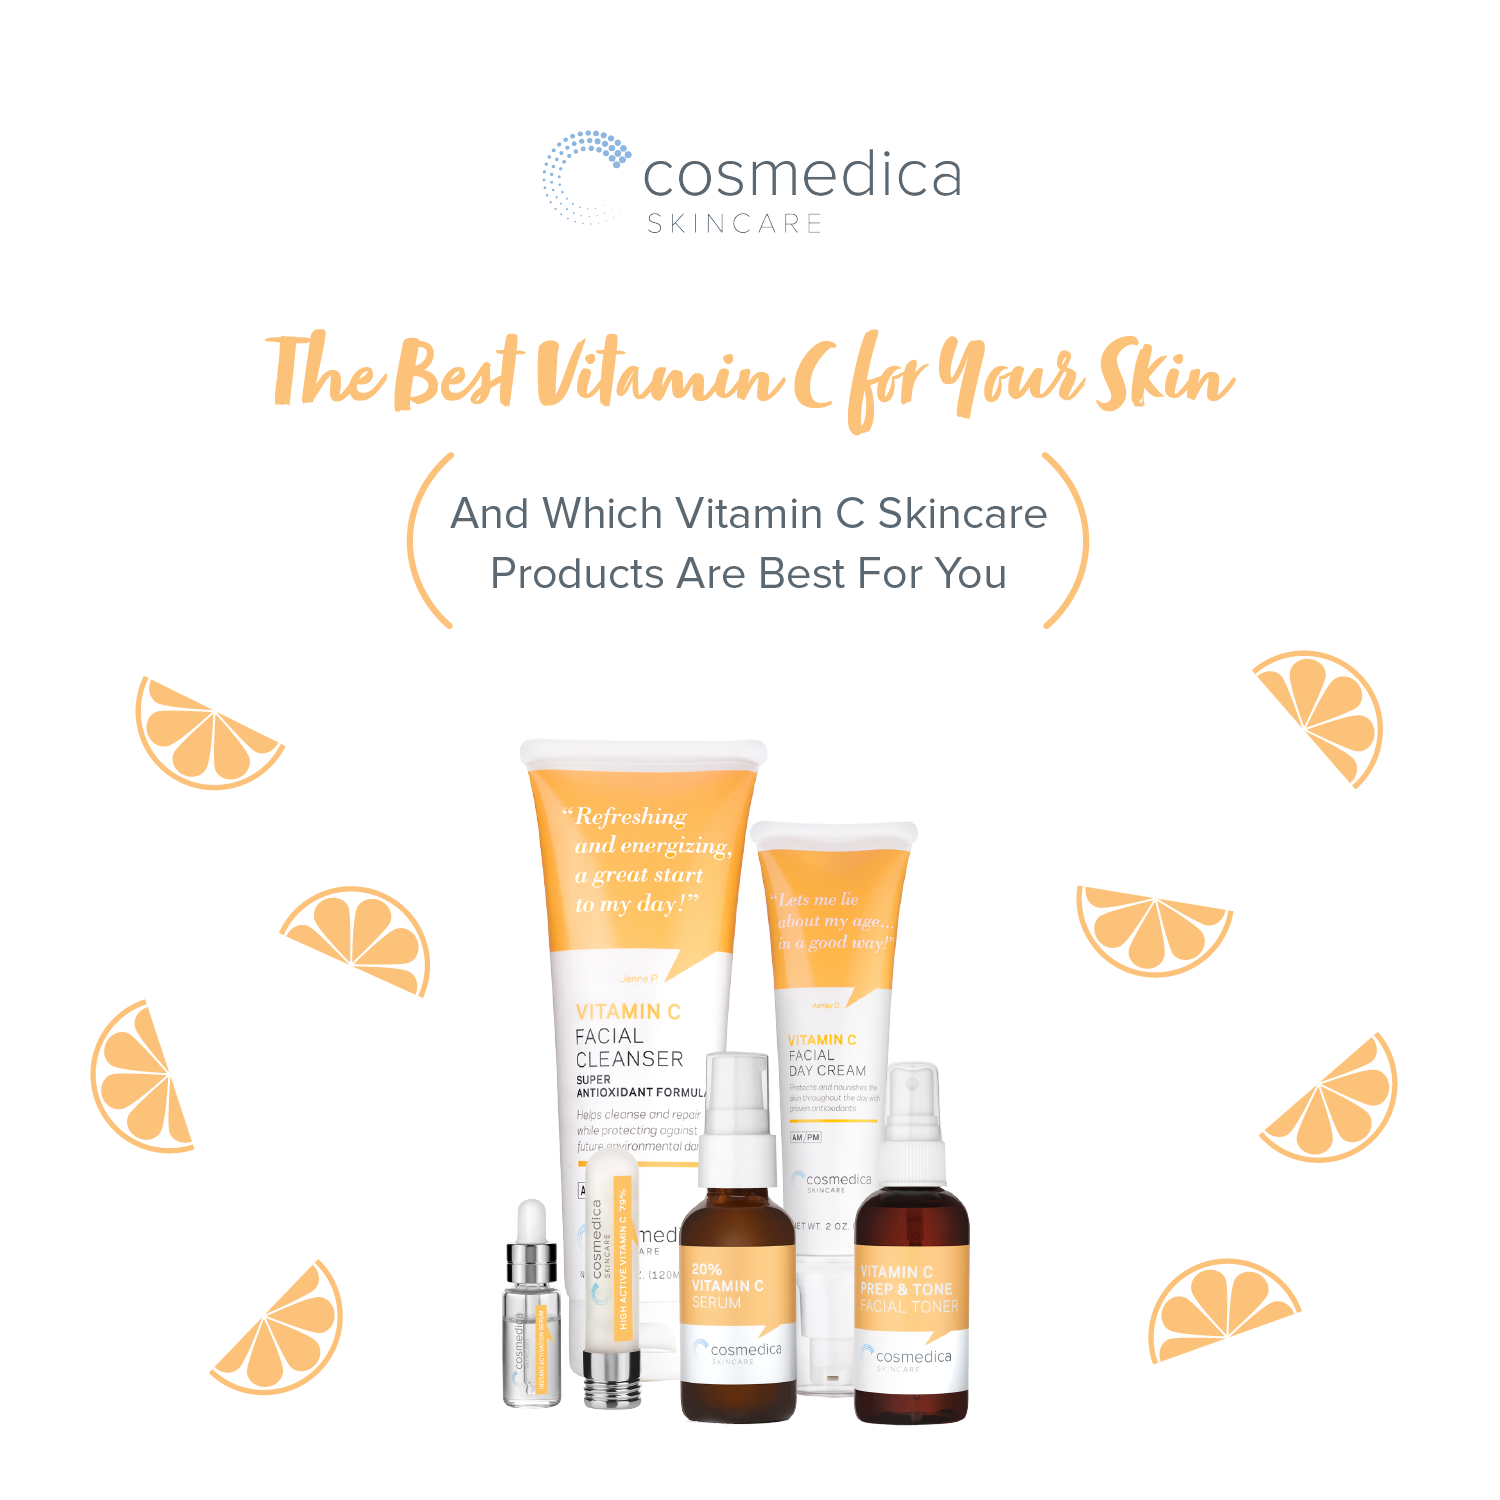 The Best Vitamin C For Your Skin